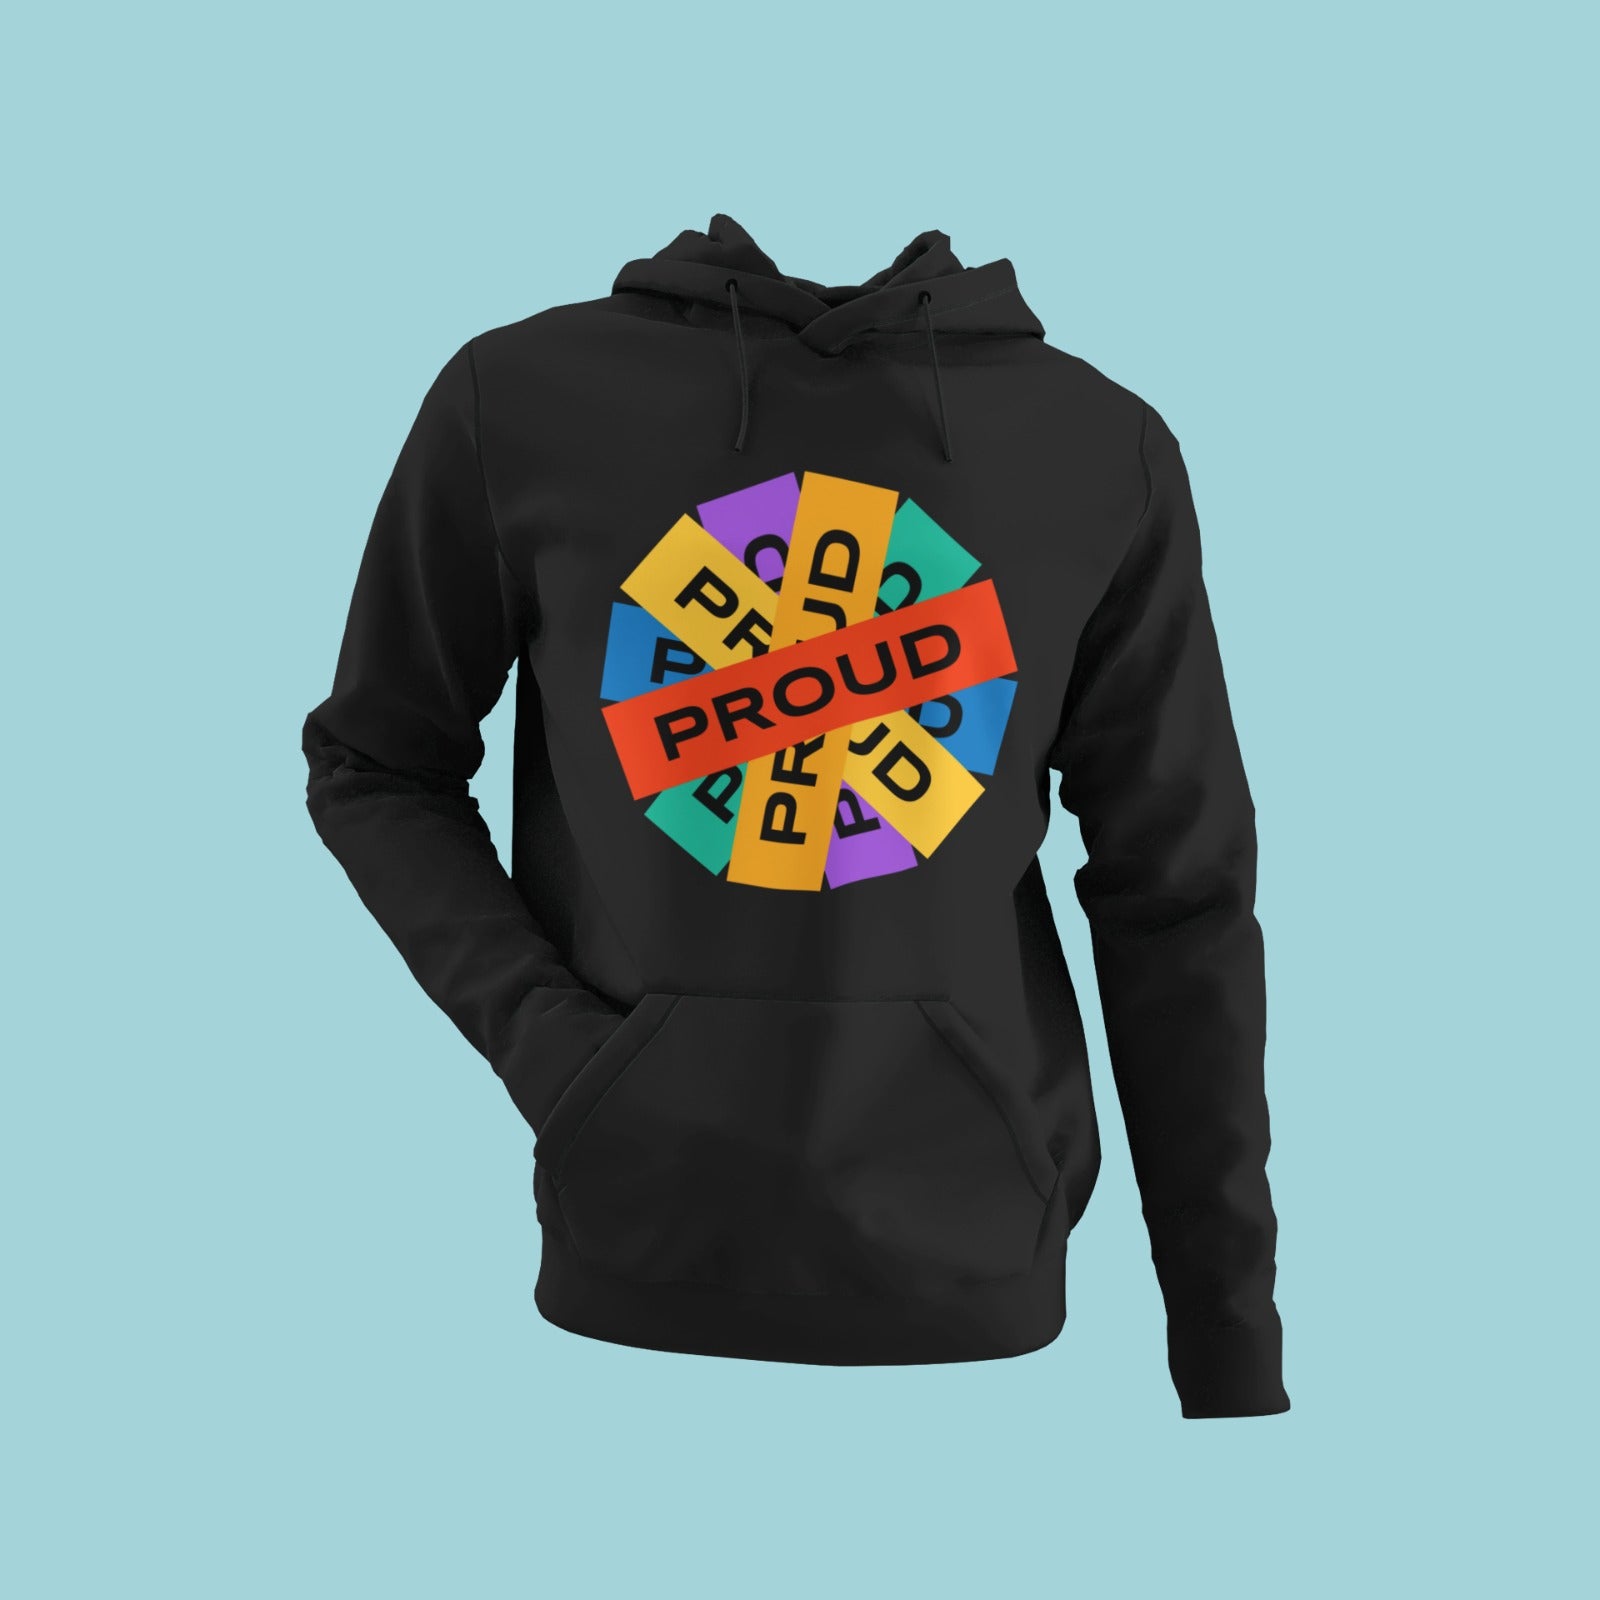 Stay stylish and show your support for the LGBTQ+ community with this black hoodie featuring a graphic design of "PROUD" in rainbow colours arranged in a circular pattern. Made with high-quality materials, it's comfortable to wear and perfect for any casual occasion. Wear it loud and proud, and let the world know that love knows no boundaries.